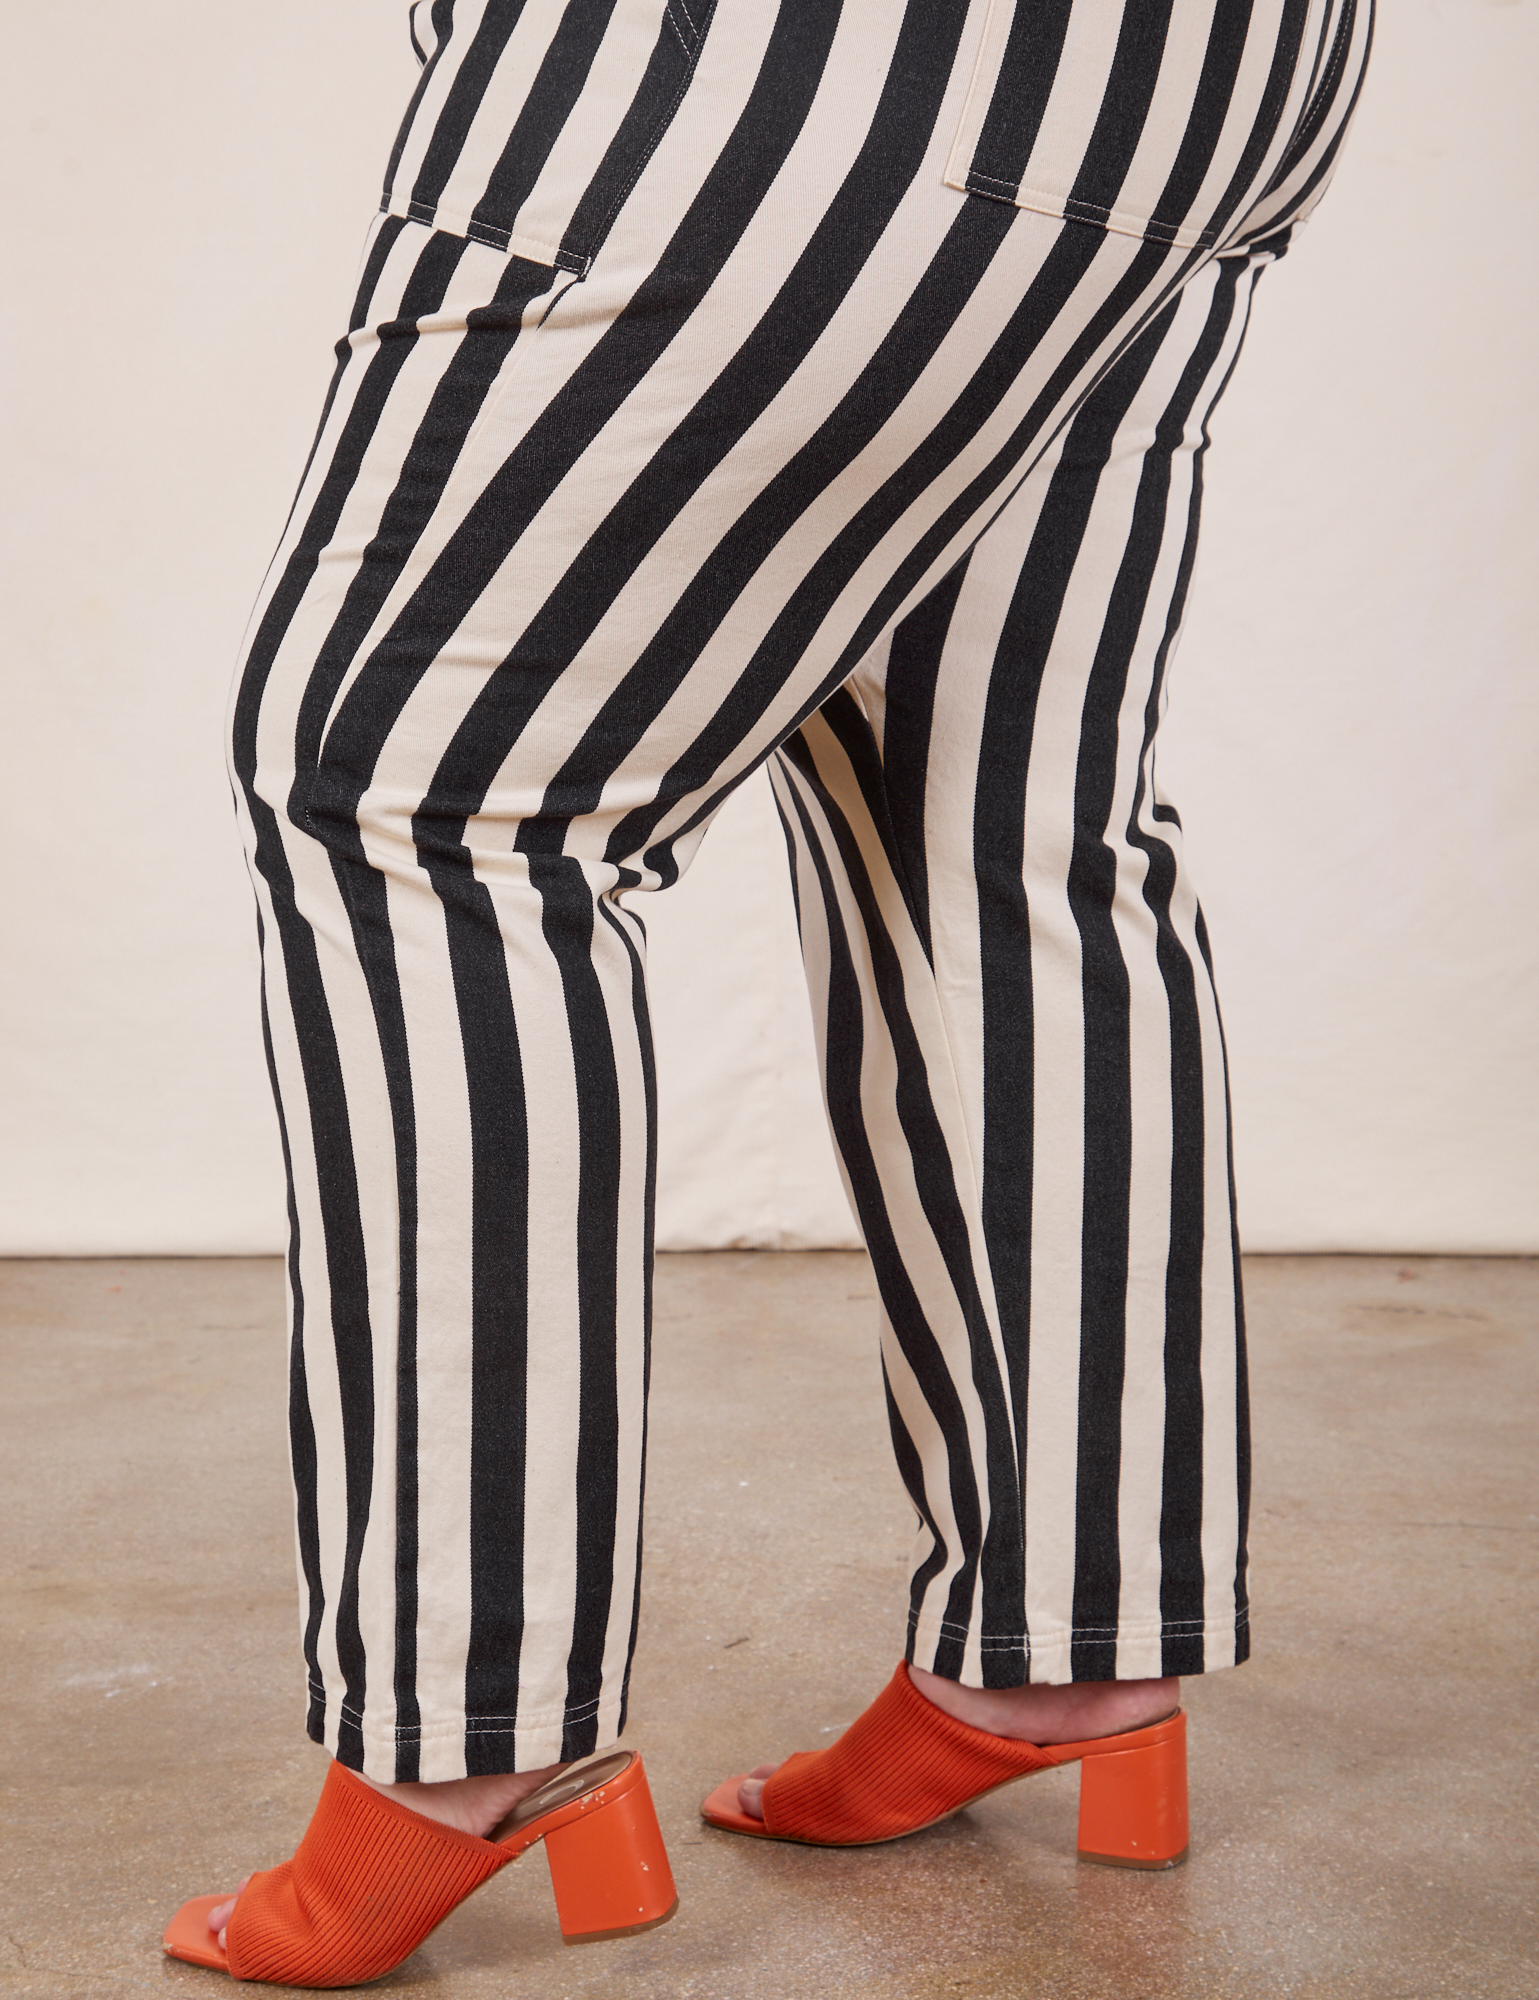 Black Striped Work Pants in White pant leg side view close up on Marielena